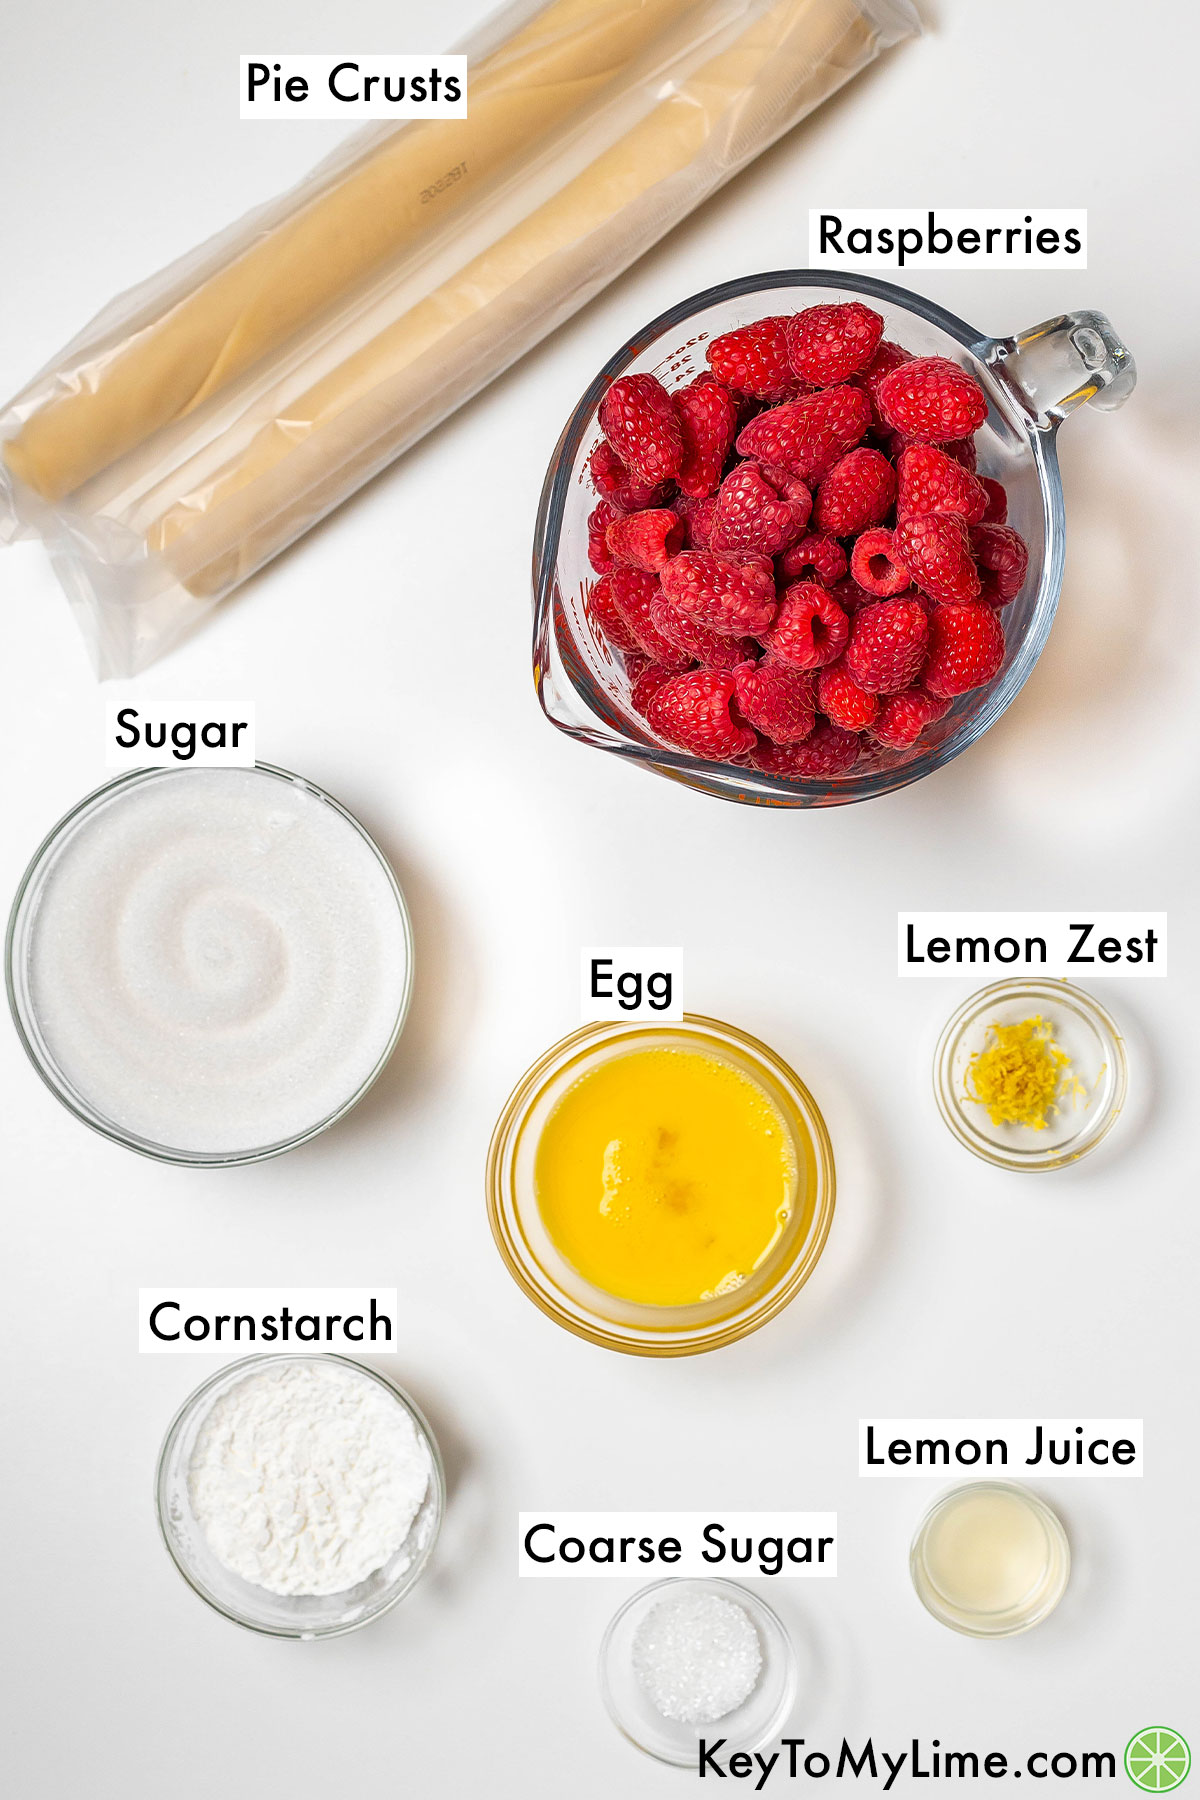 The labeled ingredients for raspberry pie.